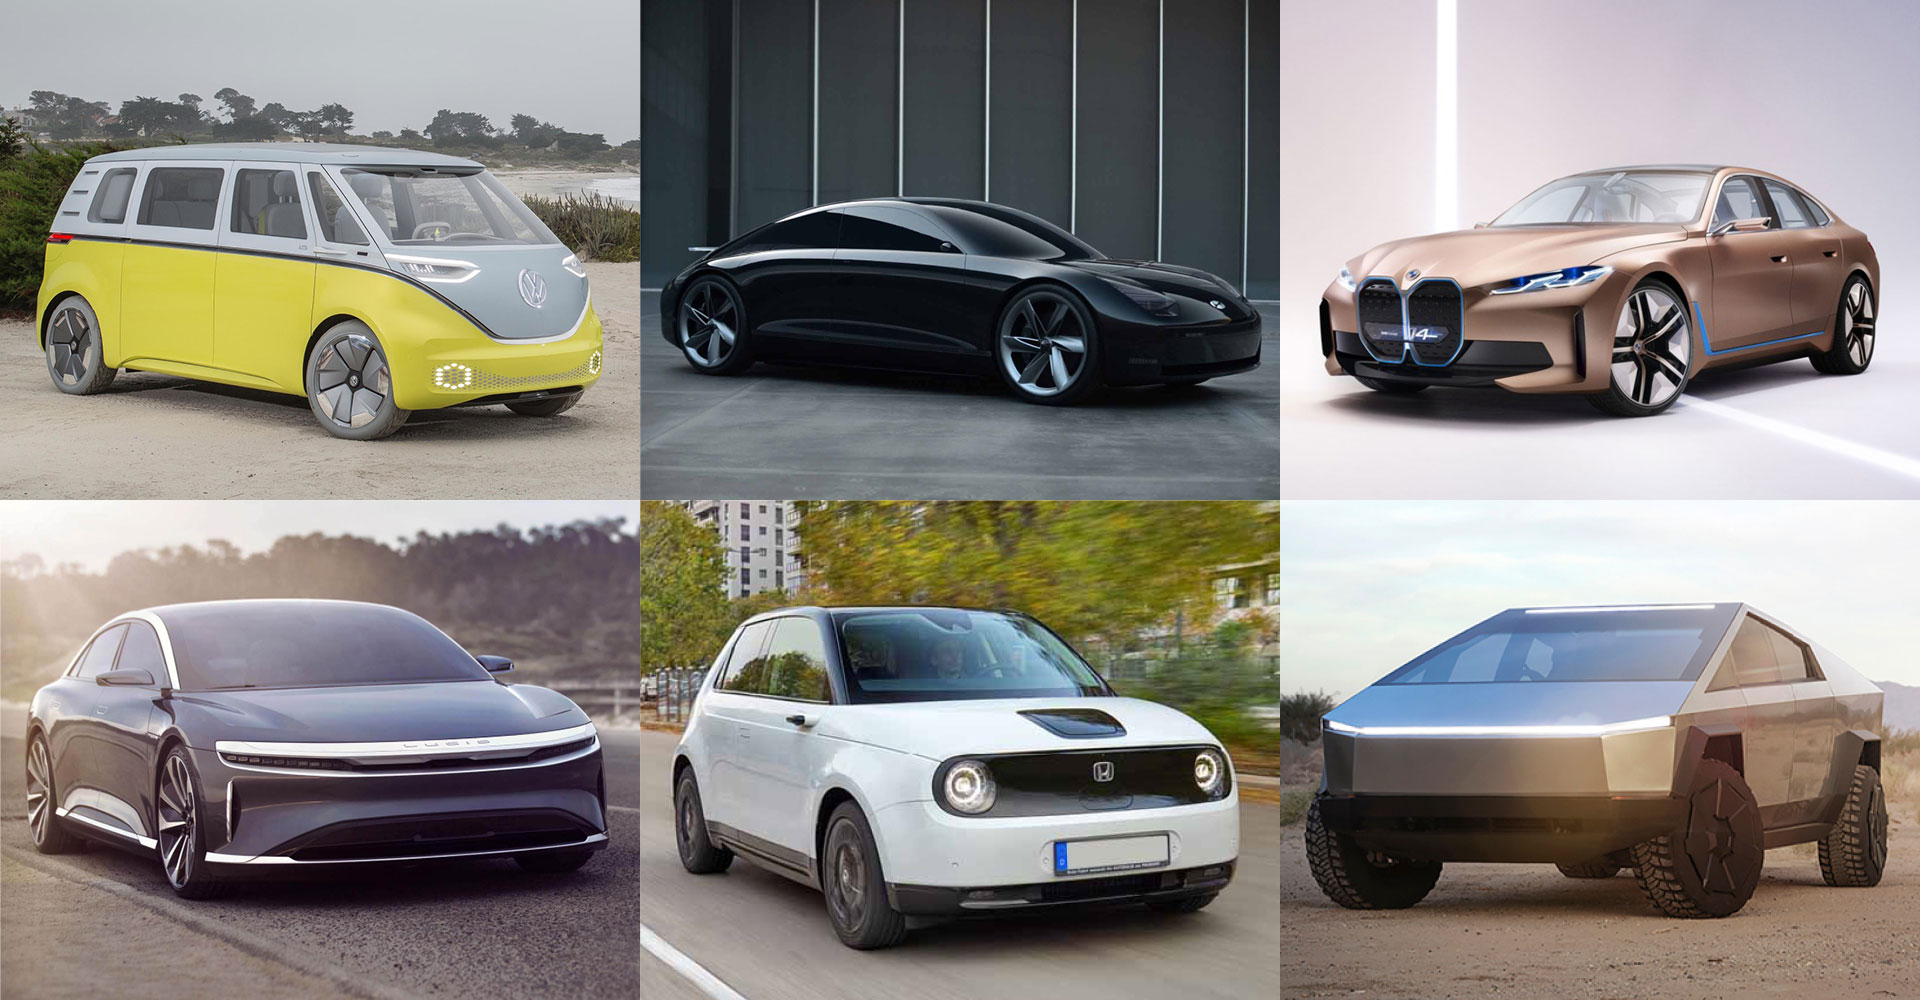 Future Electric Cars - Concept Cars and New Releases | EDF